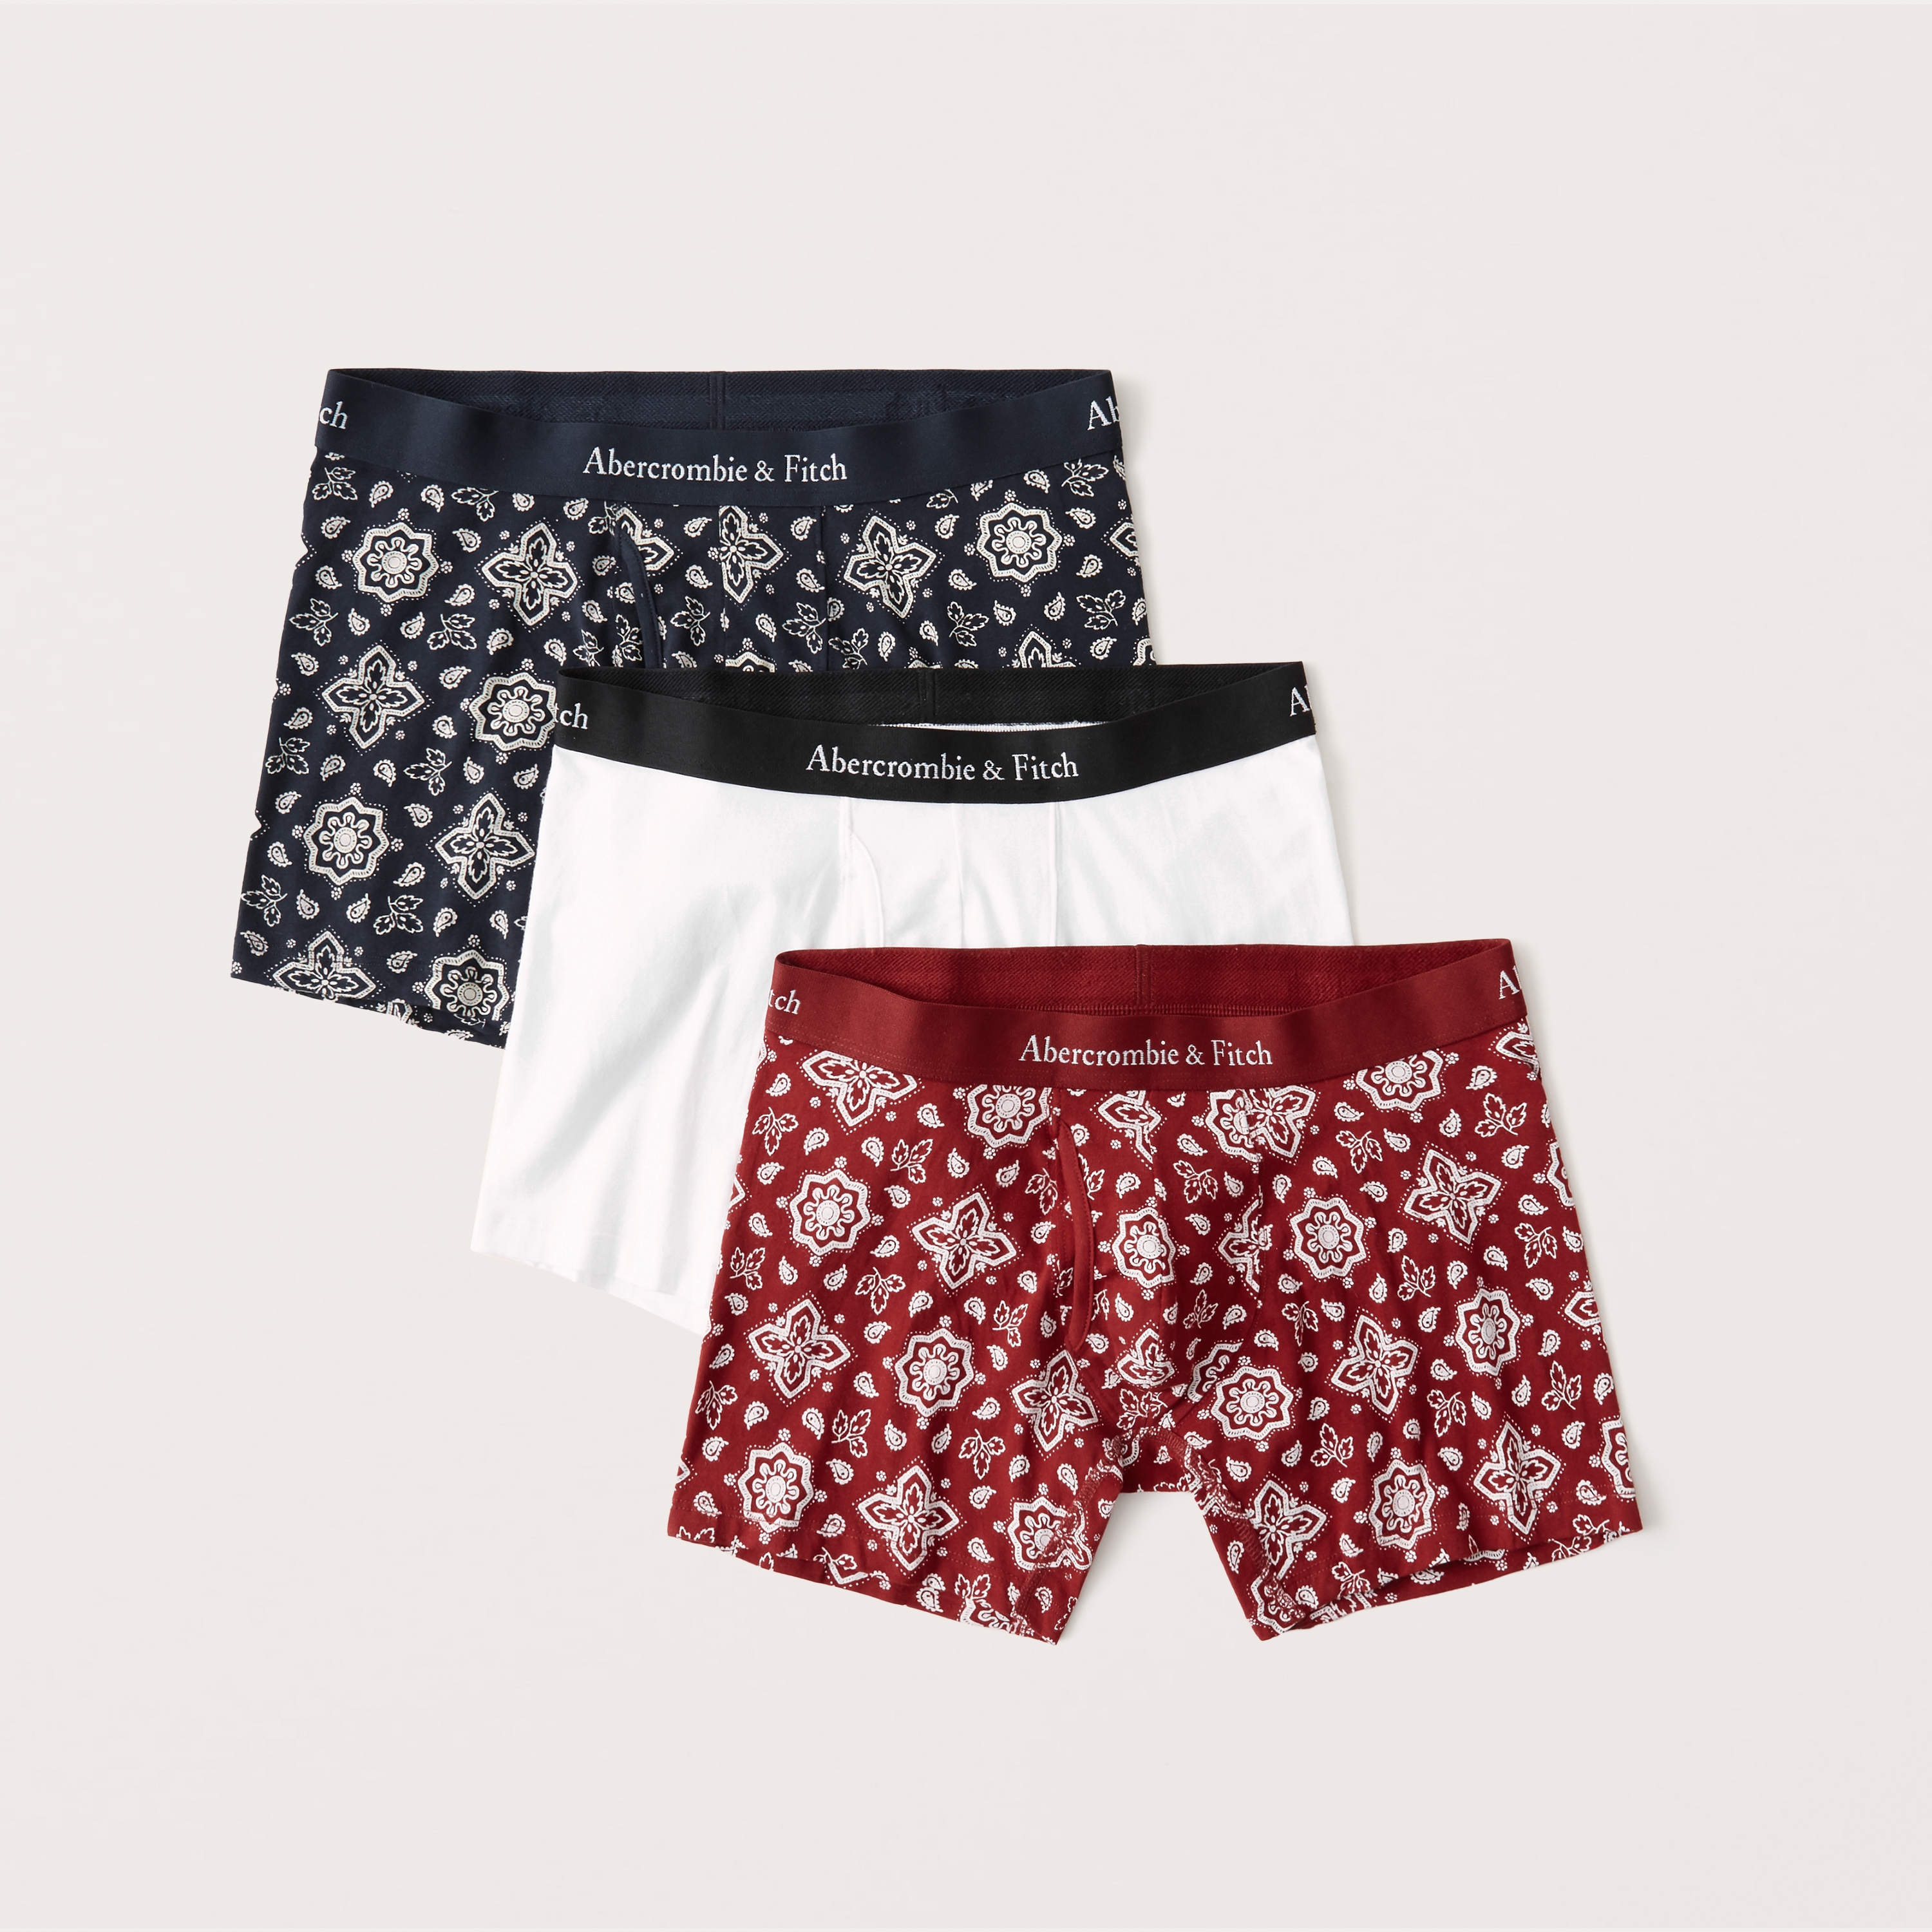 abercrombie and fitch boxer briefs